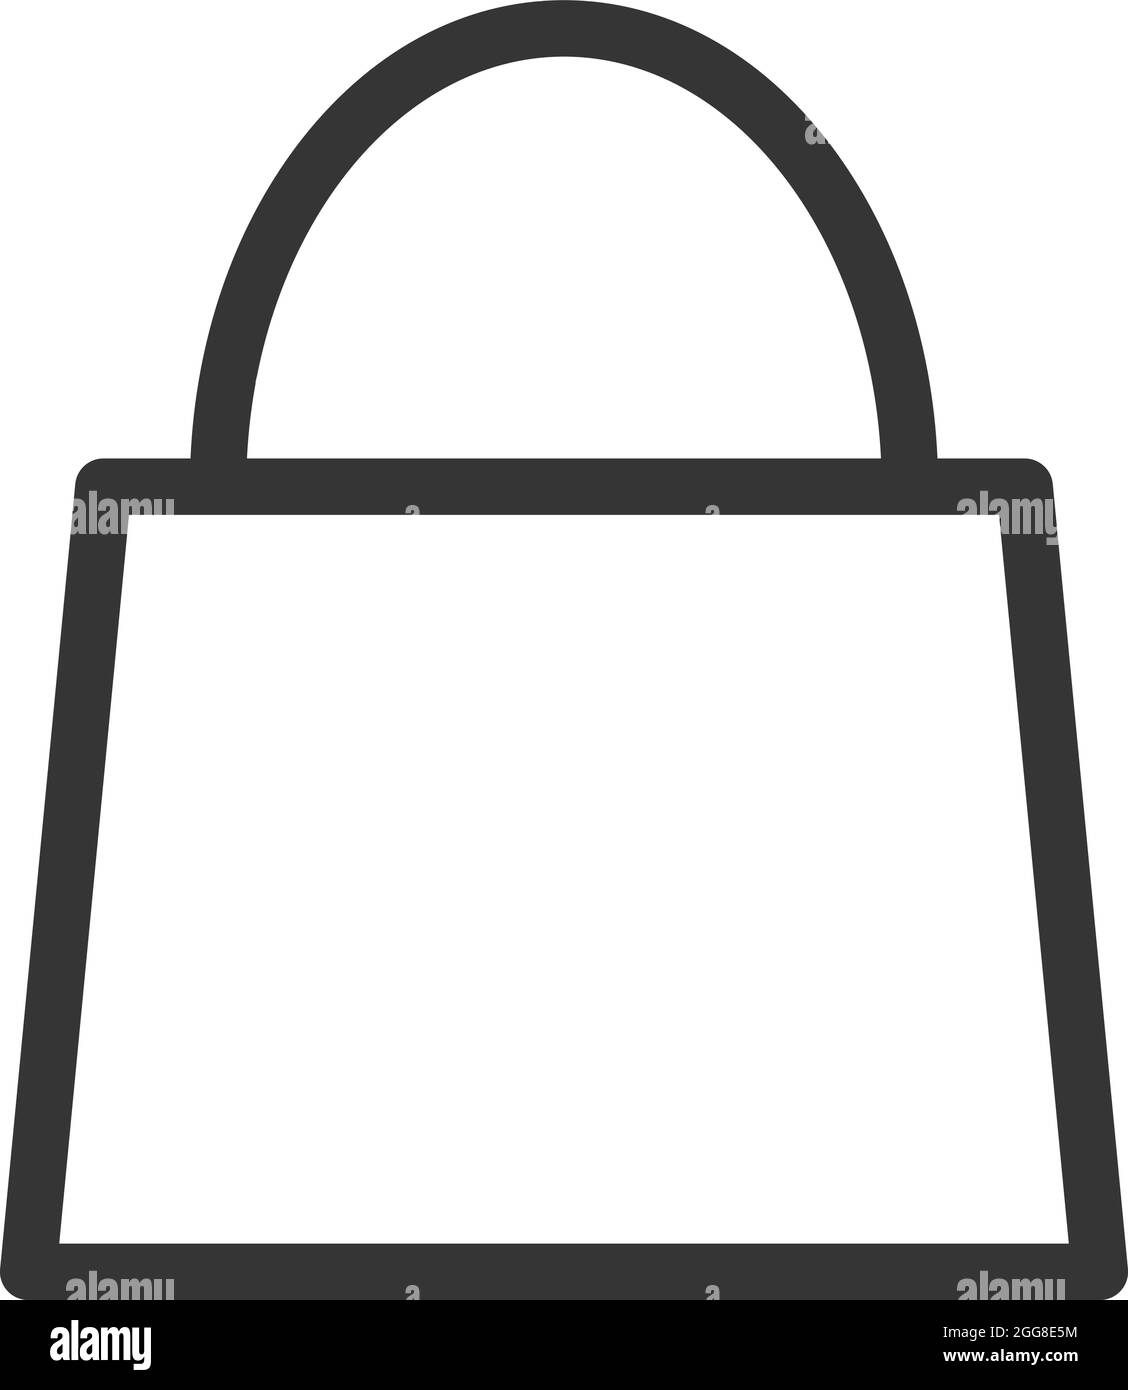 Small shopping bag, illustration, vector on a white background. Stock Vector